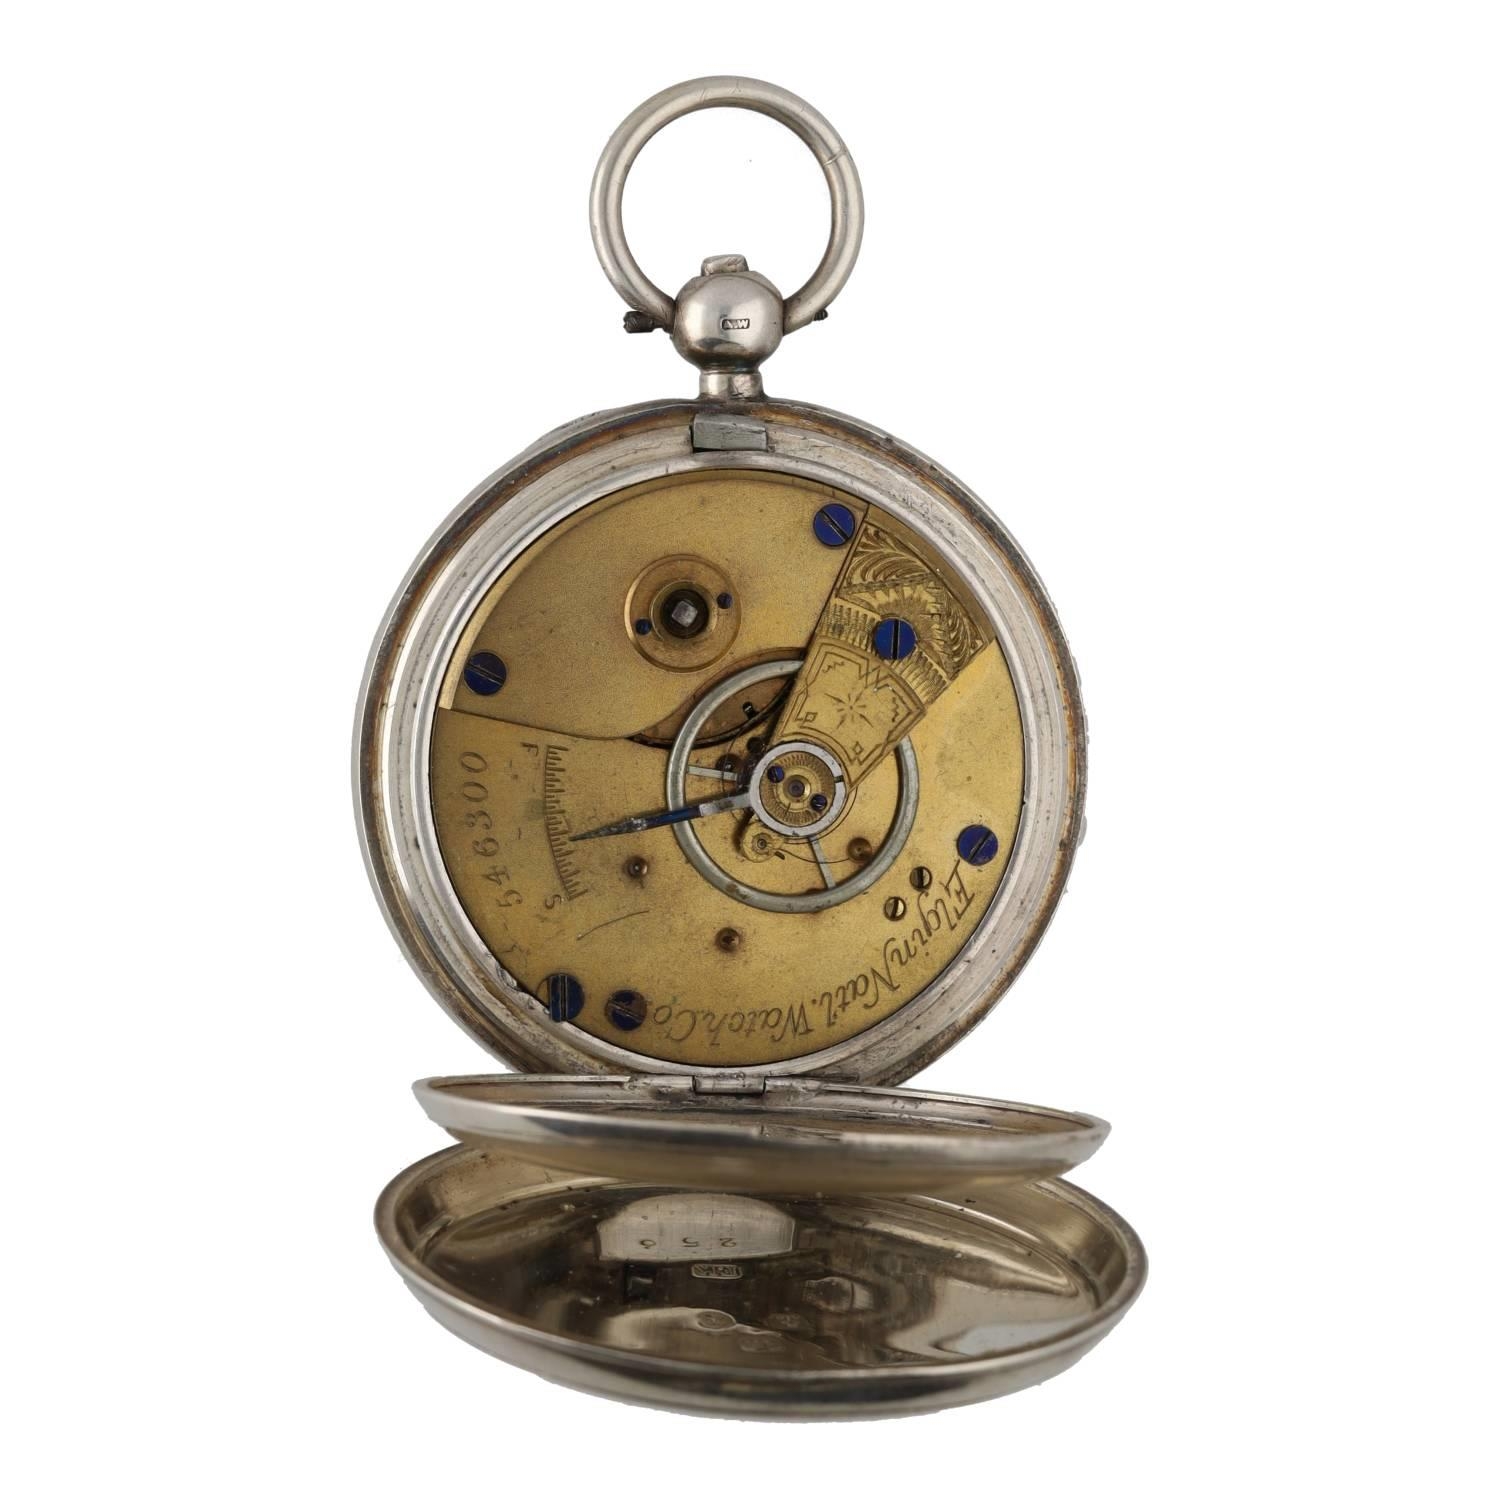 Elgin National Watch Co. silver lever pocket watch, circa 1877, serial no. 546300, signed movement - Image 2 of 3